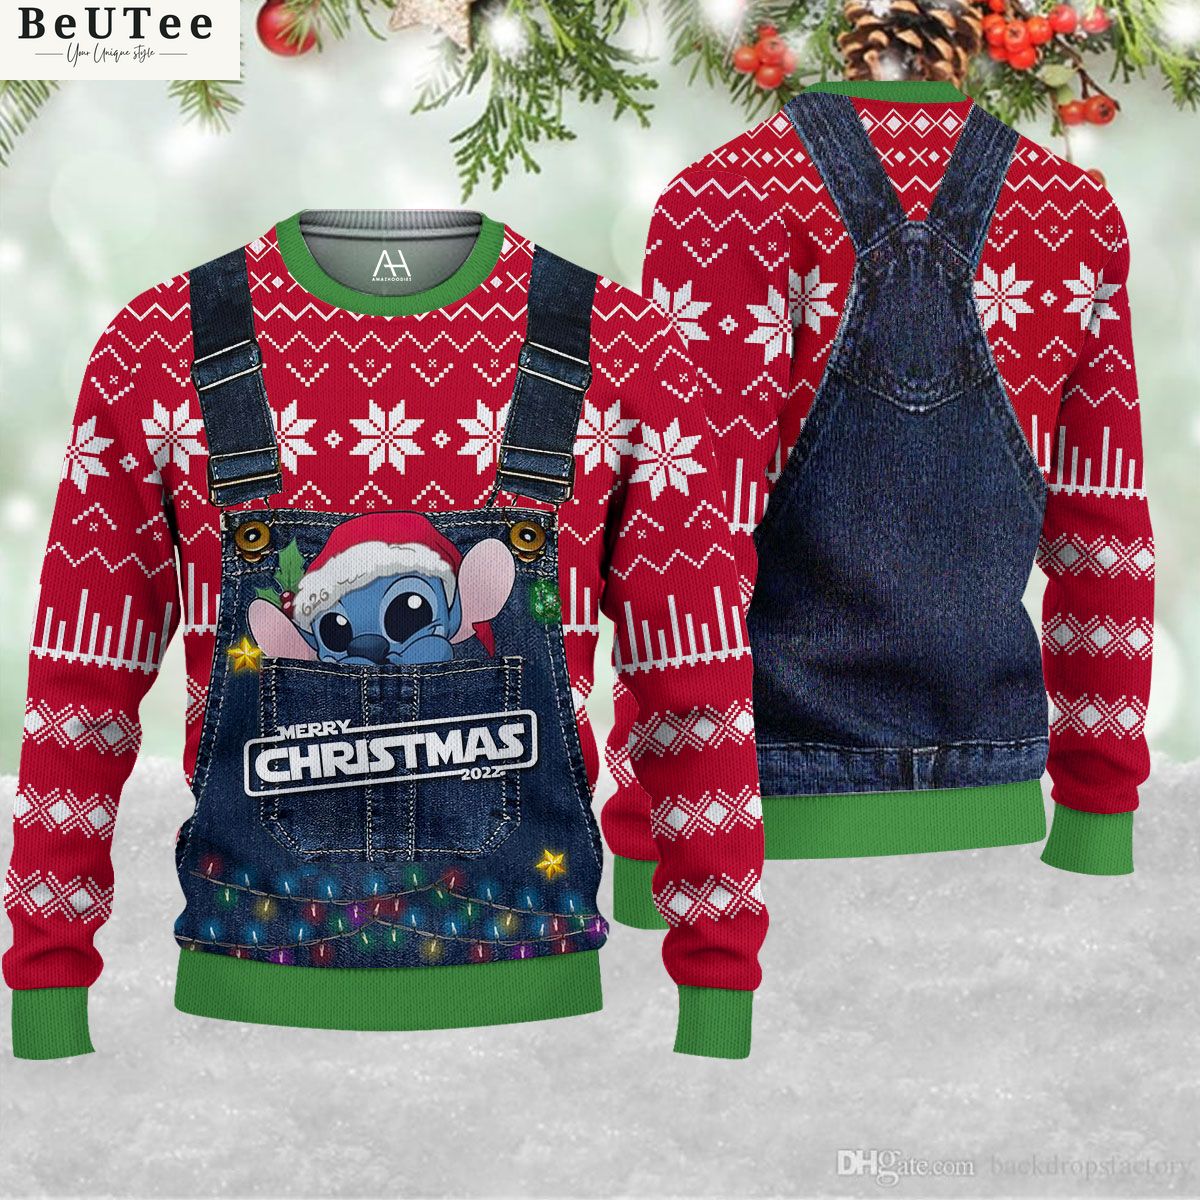 stitch merry christmas 3d all over printed ugly sweater 1 K9rW3.jpg